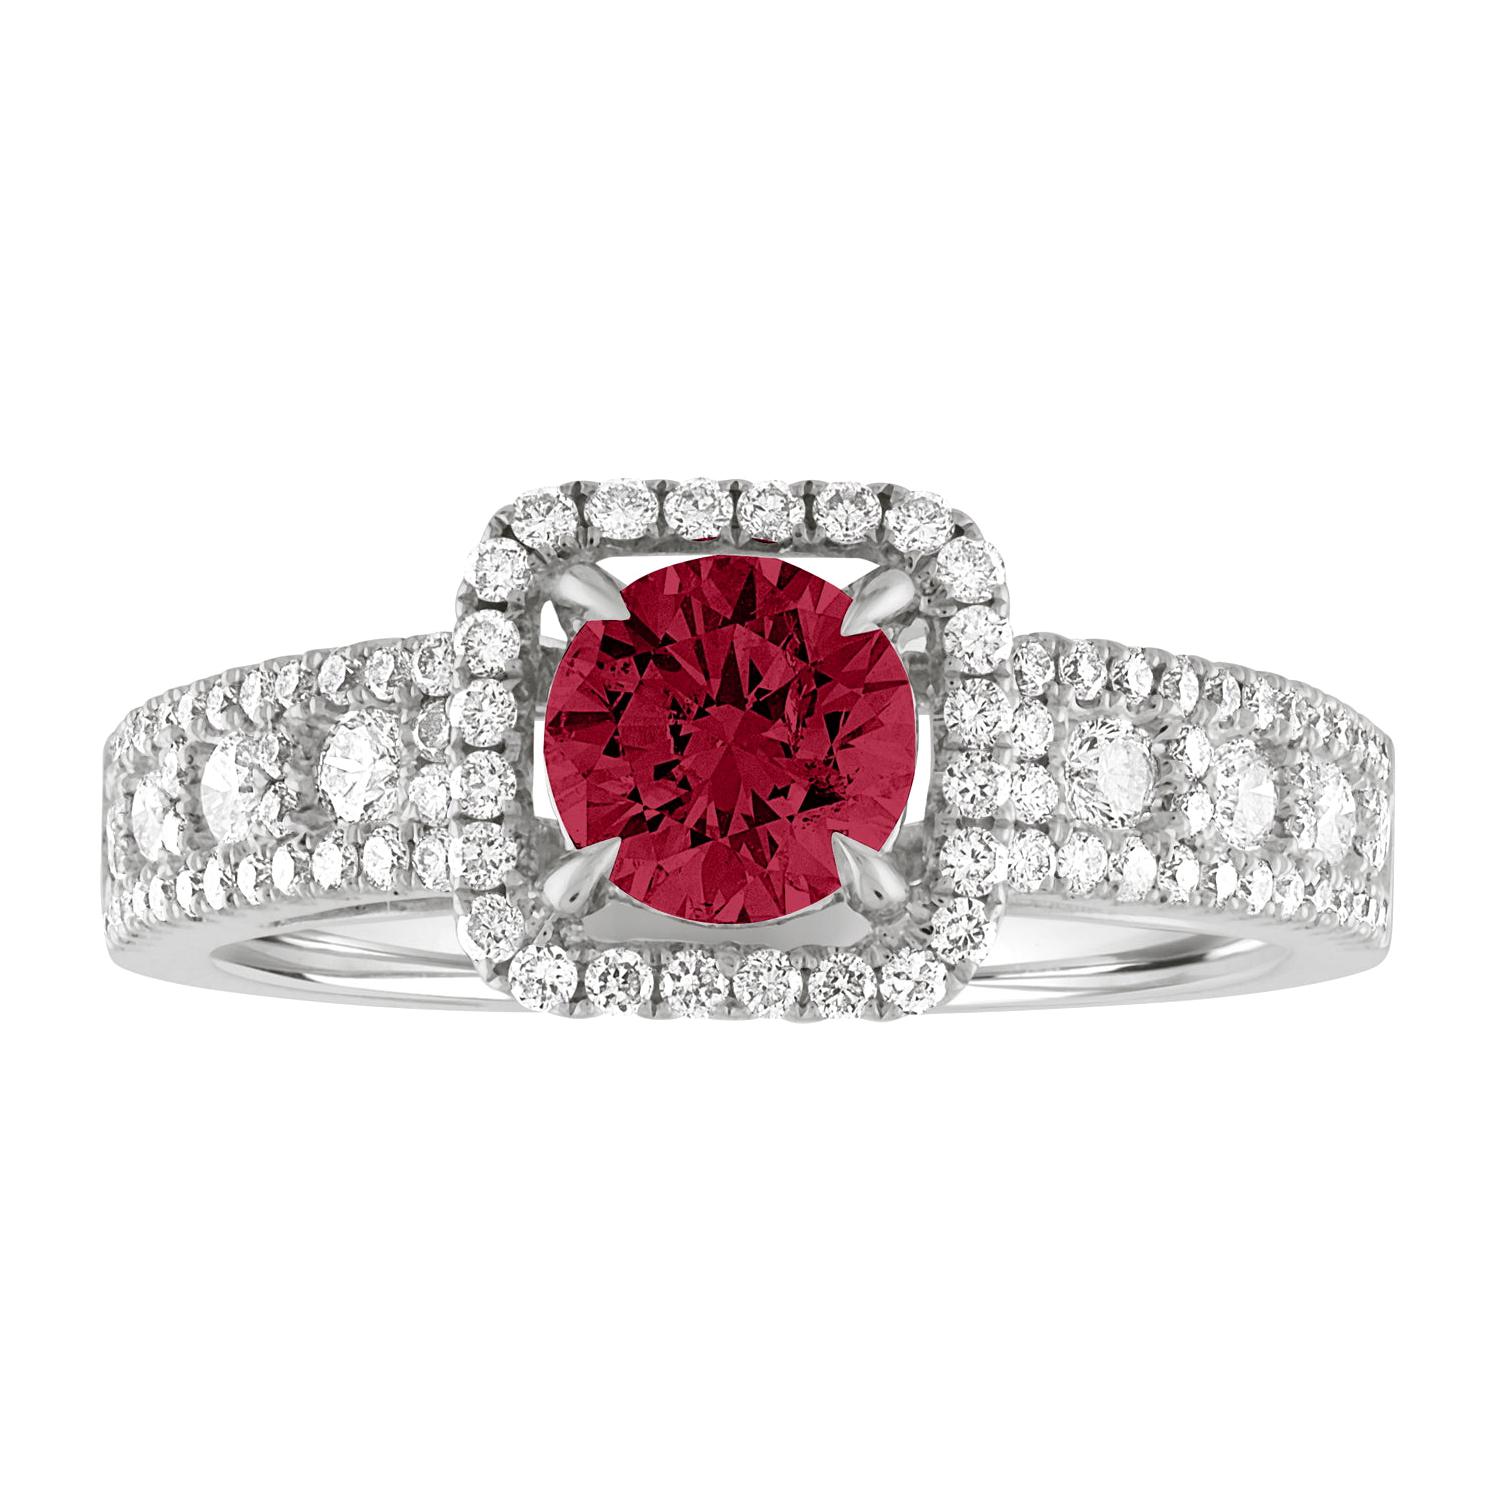 AGL Certified 0.87 Carat Round Ruby Diamond Gold Ring